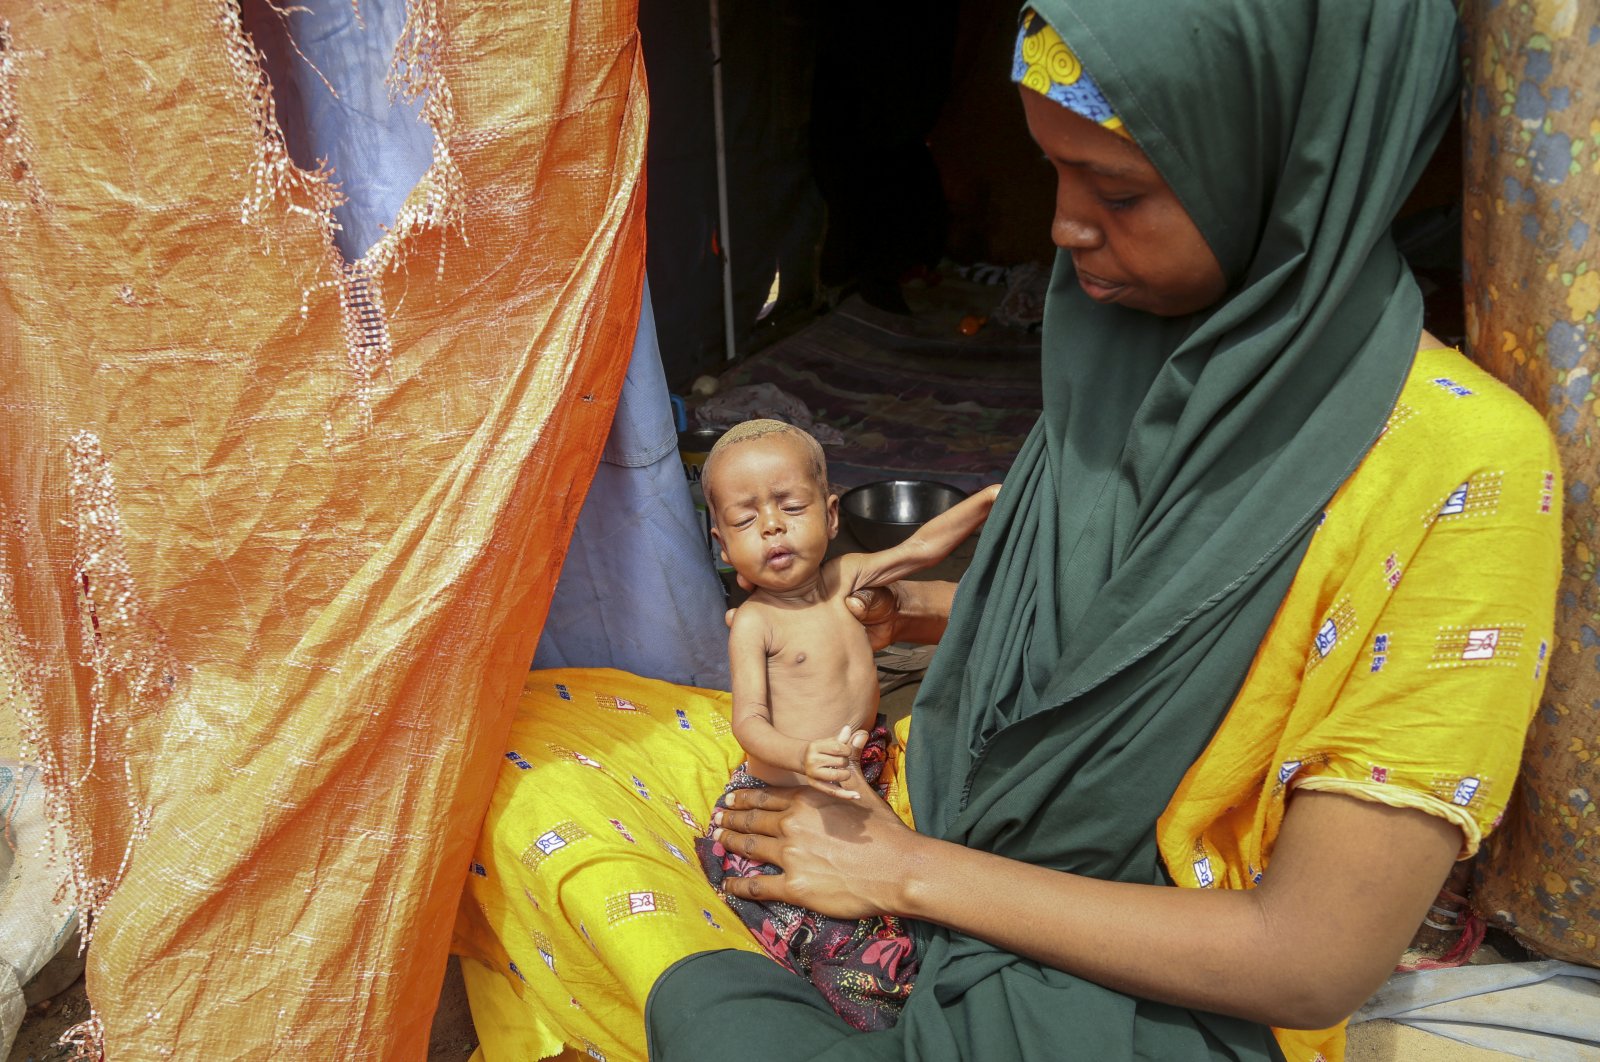 Amina Shuto, 21, who fled the drought-stricken Lower Shabelle area, holds her 2-month-old malnourished child at a makeshift camp for the displaced on the outskirts of Mogadishu, Somalia, June 30, 2022. (AP Photo)